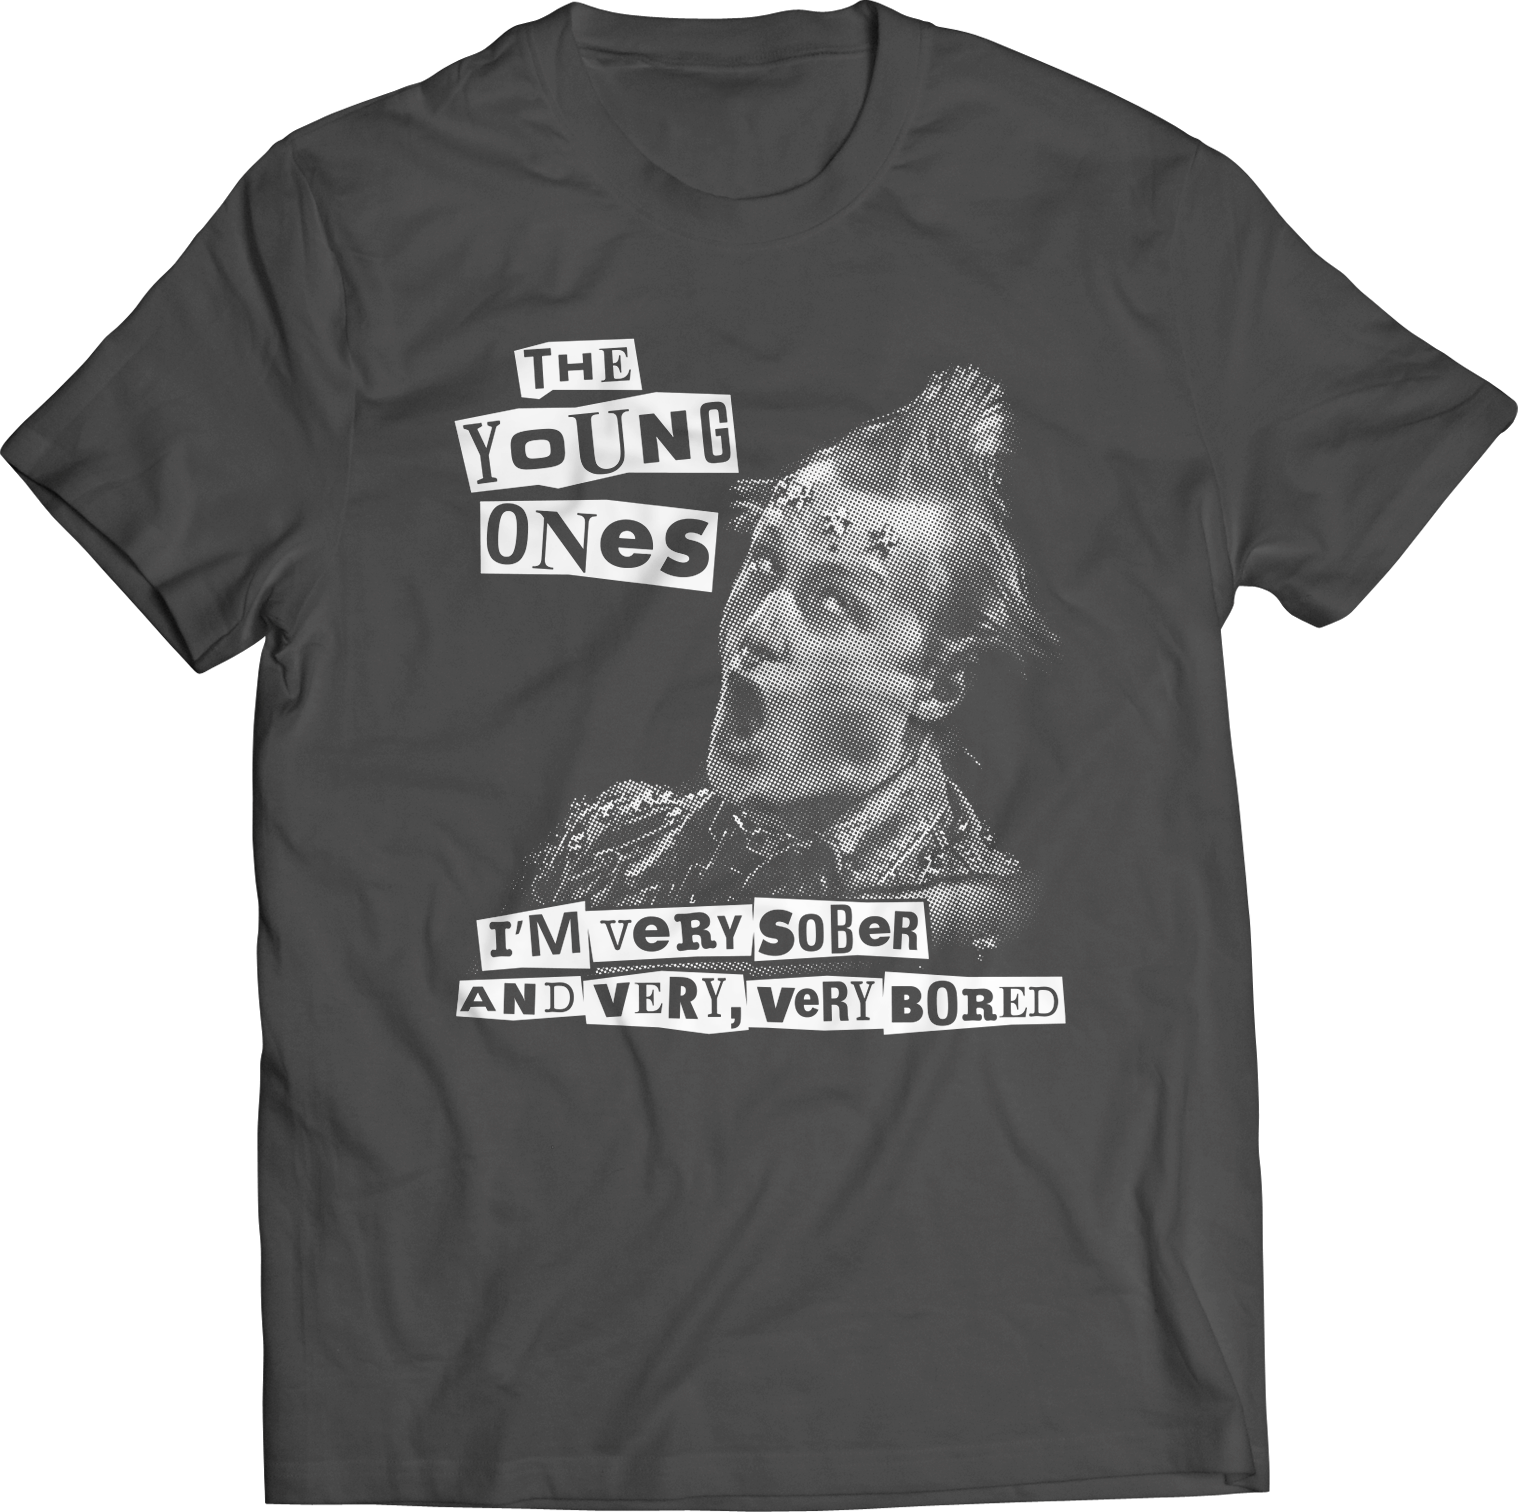 YOUNG ONES "I'M VERY VERY SOBER" T-SHIRT